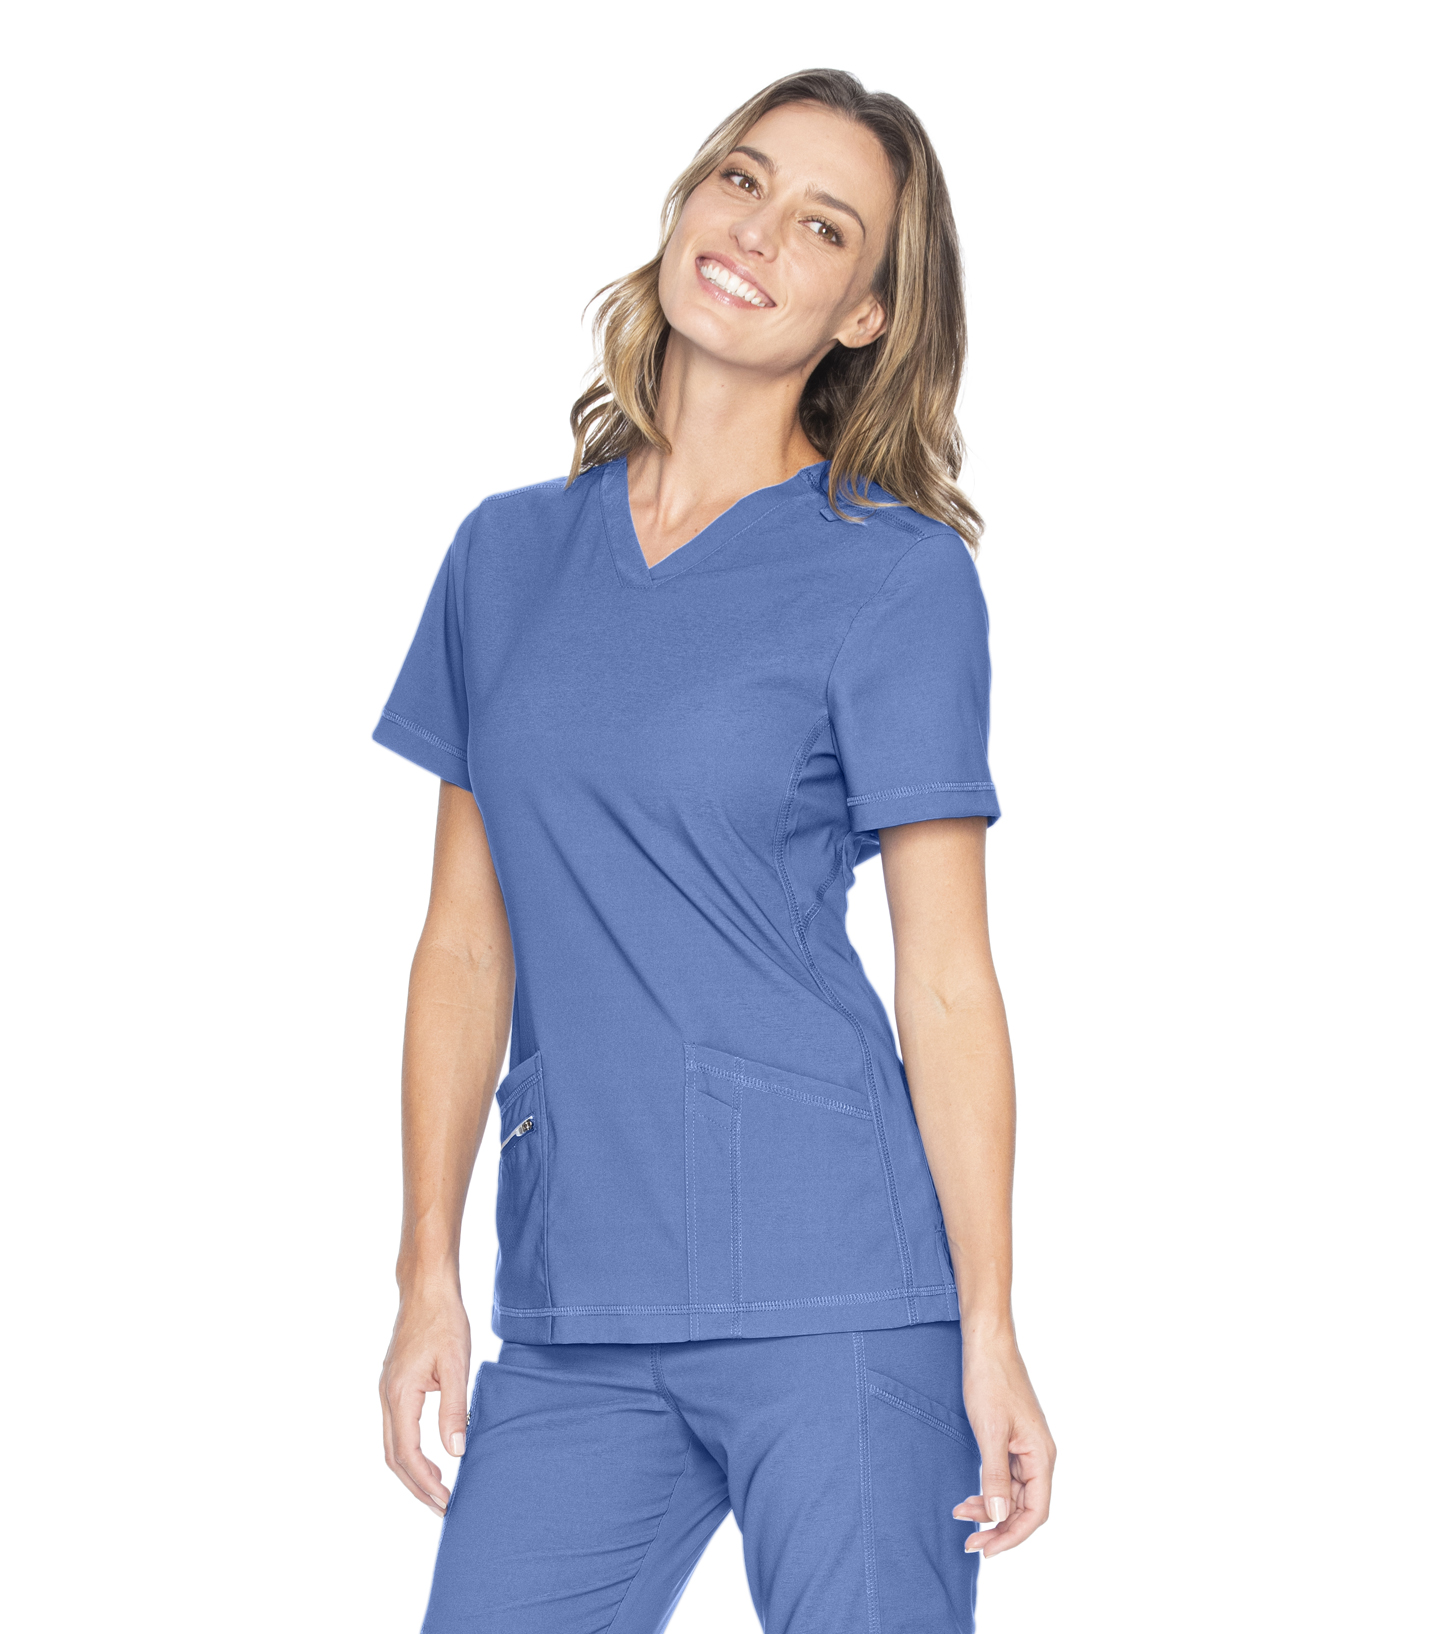 Women's V-Neck With Top Entry PocketS